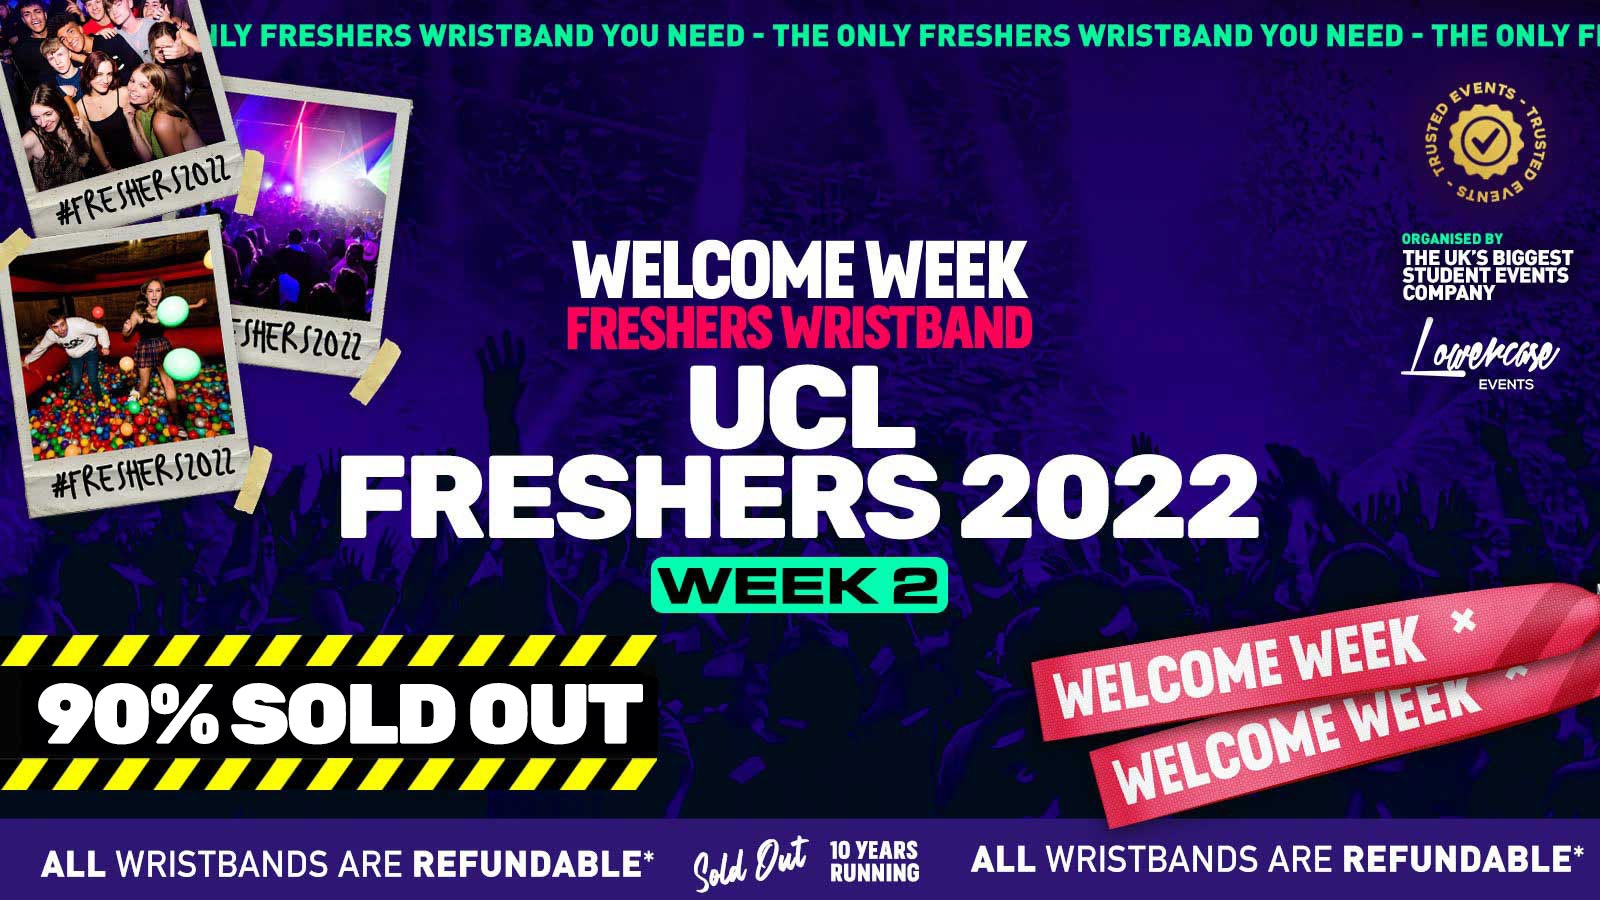 UCL – University College London Freshers 2022 – London Freshers Week 2022 – [Welcome Week] – LESS THAN 75 LEFT⚠️